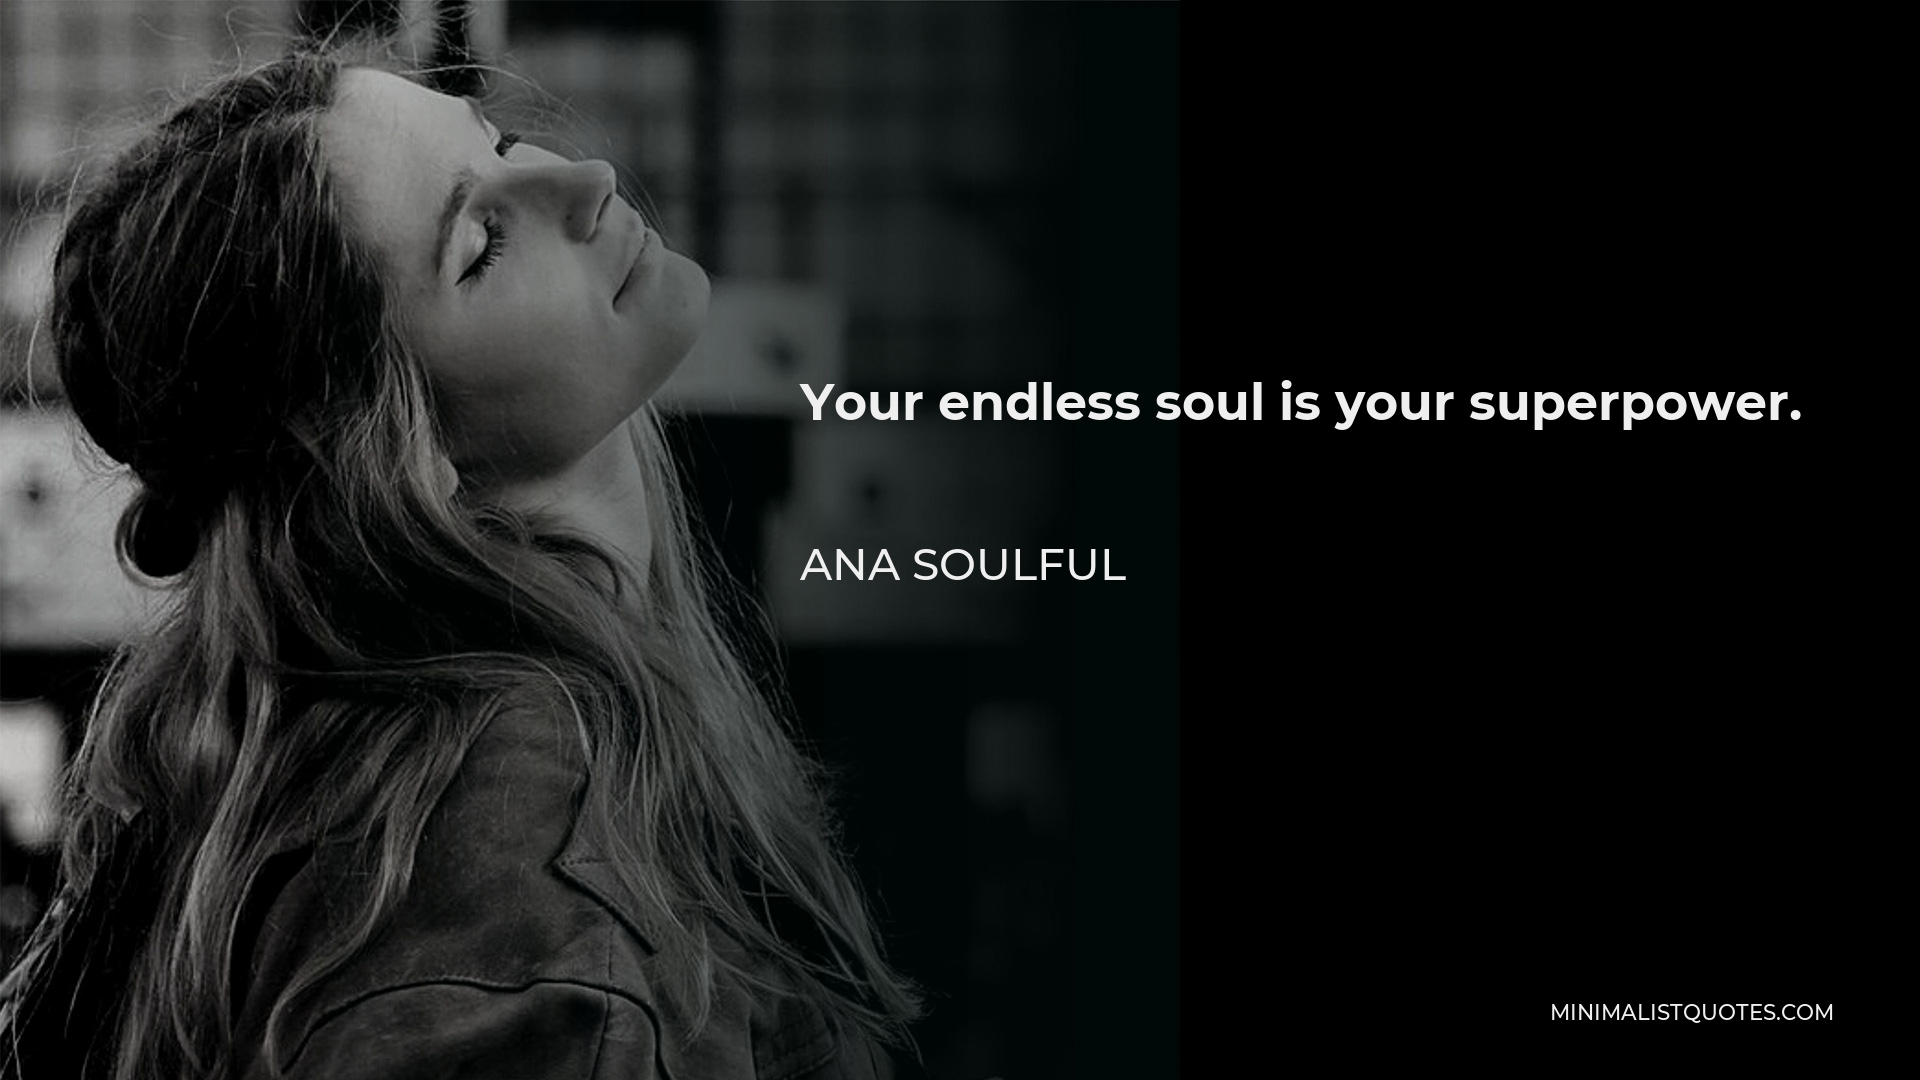 Ana Soulful Quote - Your endless soul is your superpower.